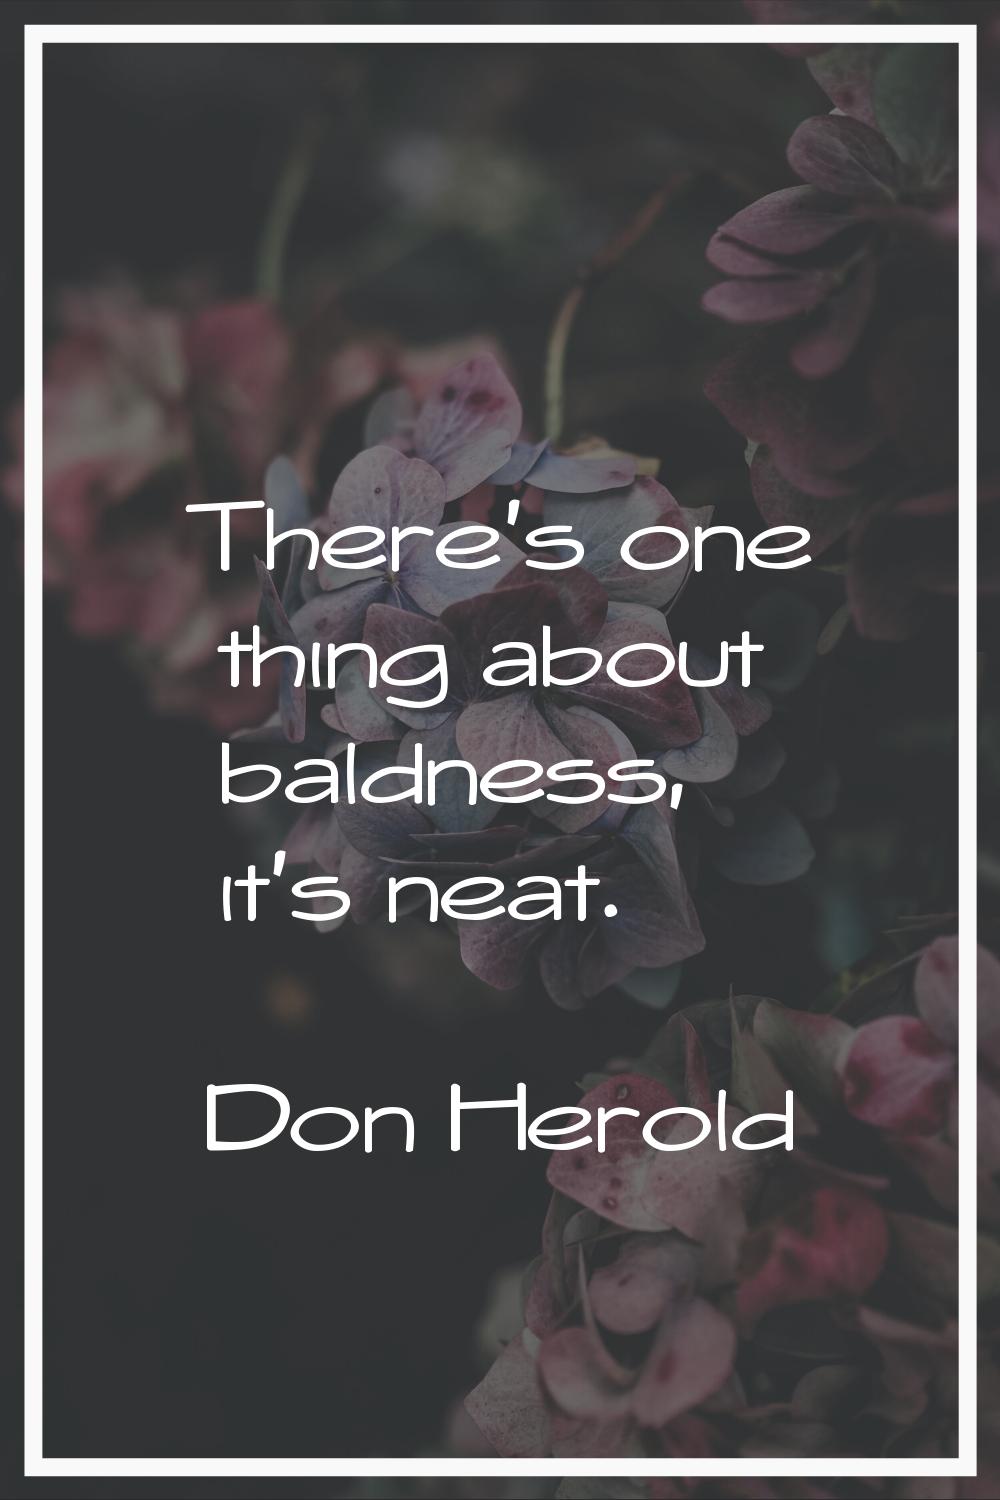 There's one thing about baldness, it's neat.